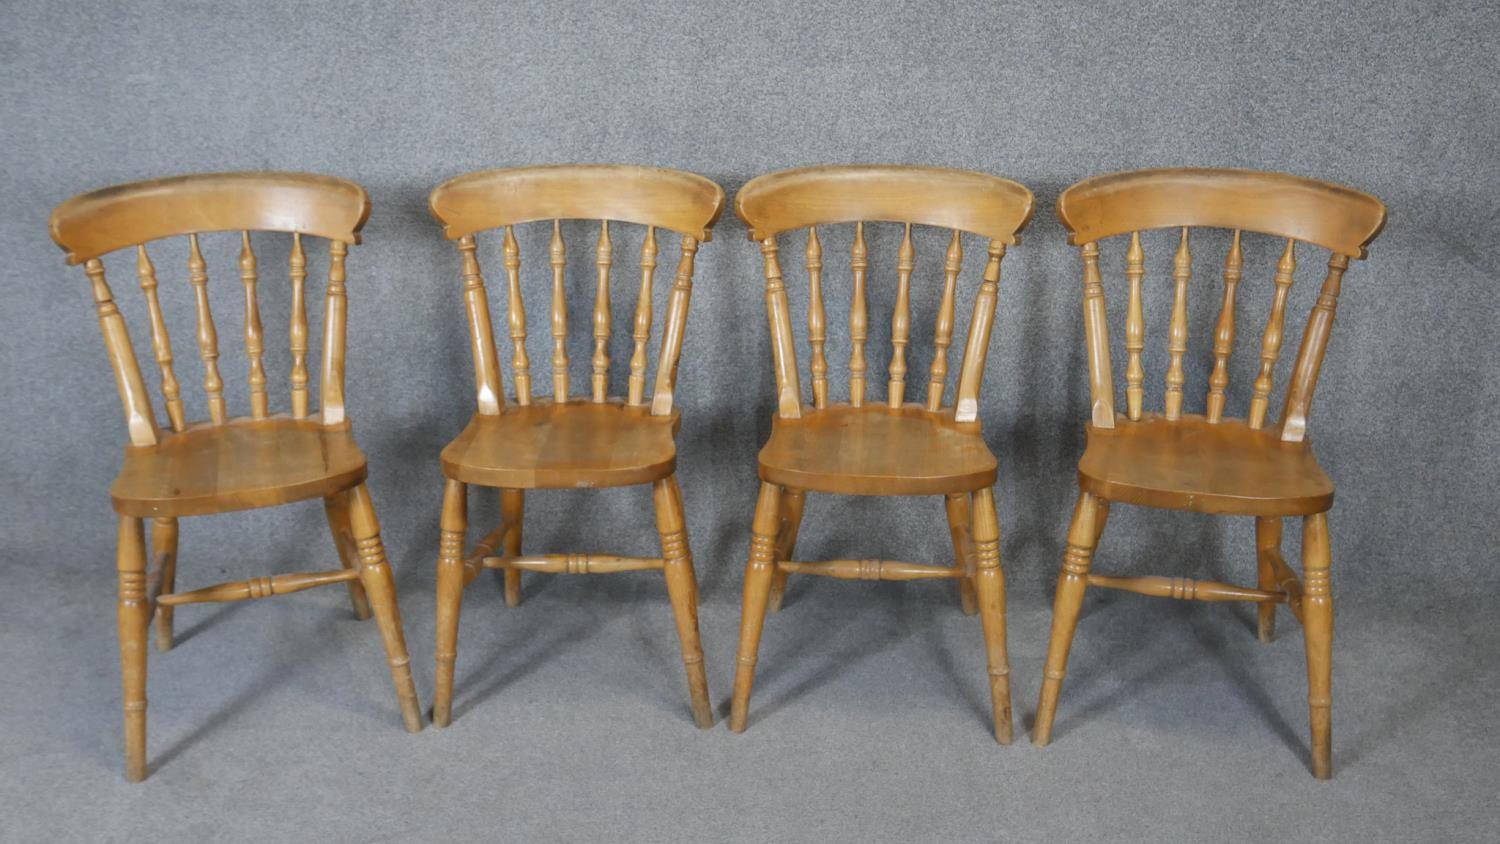 A set of four late 19th century bar back kitchen chairs with elm seats.